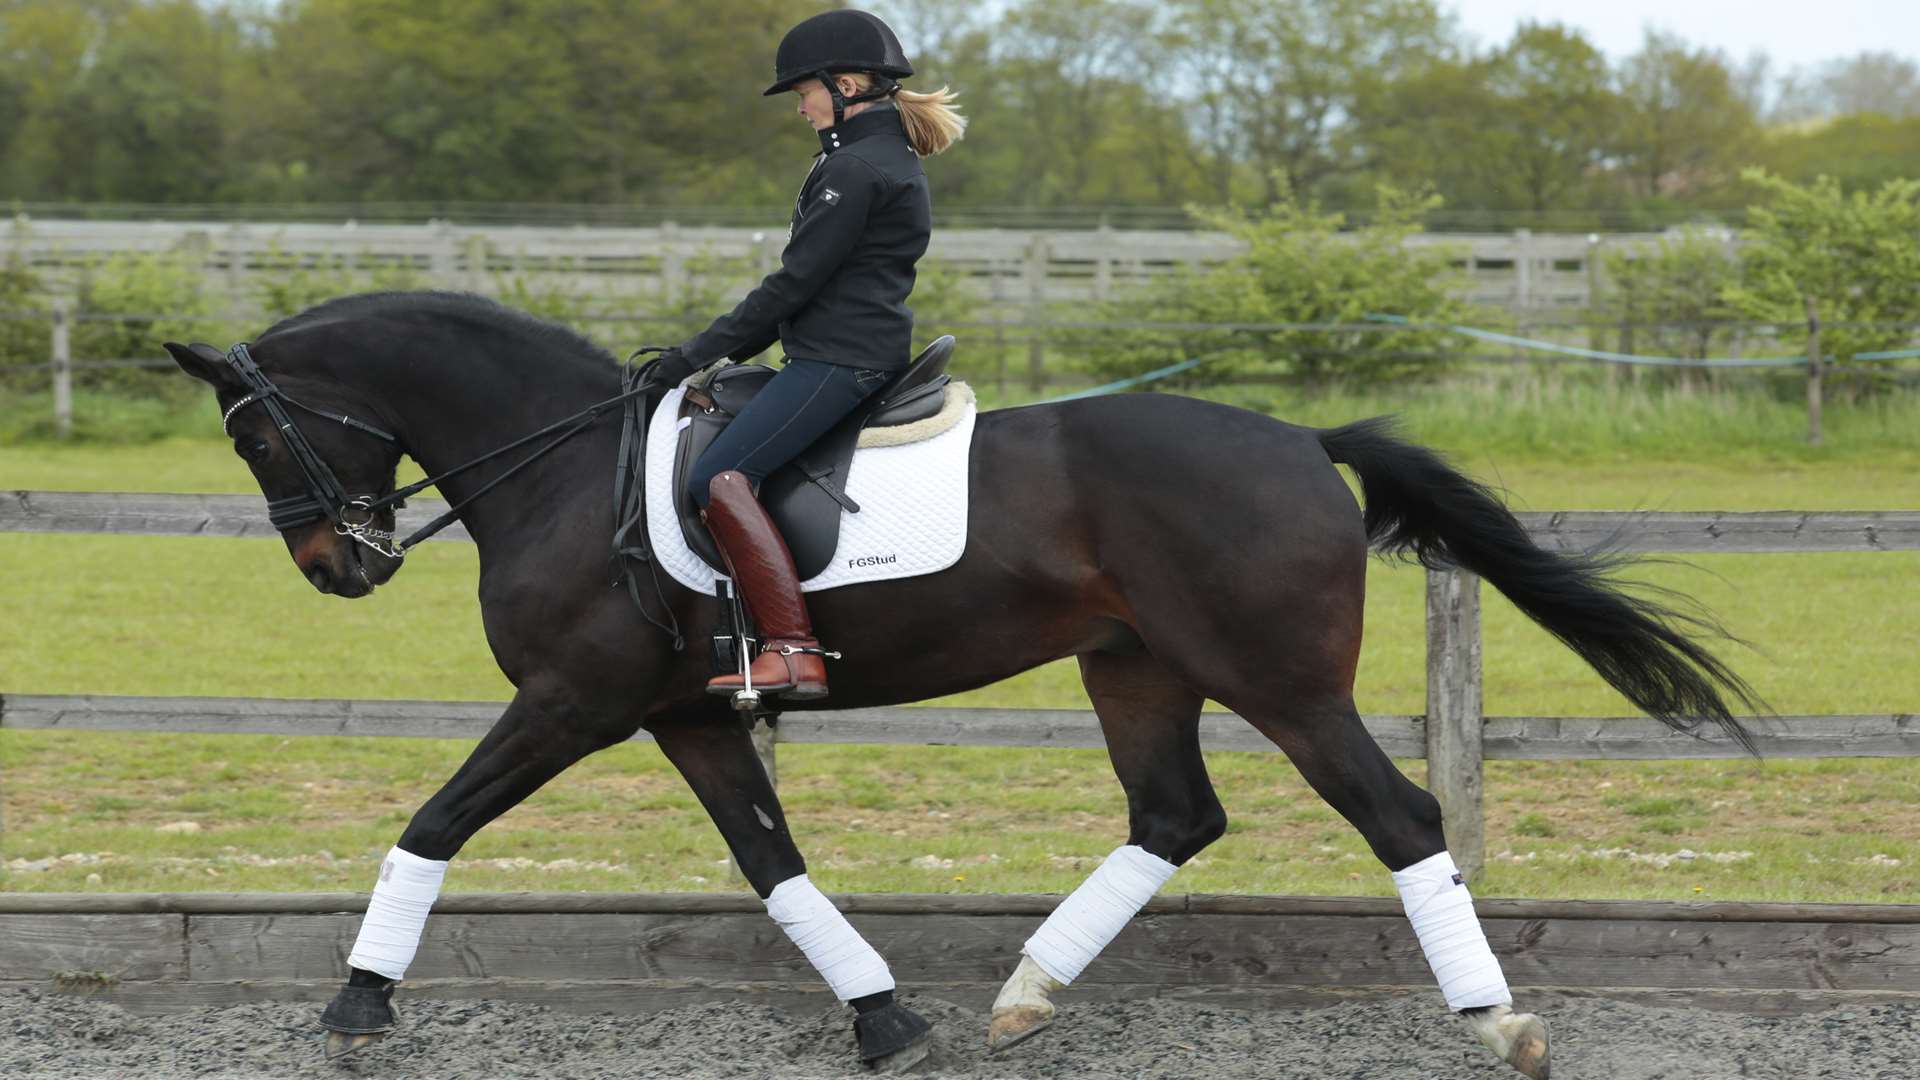 Nicola Naylor riding Amadeus at Fiddlers Green Stud Picture: Martin Apps